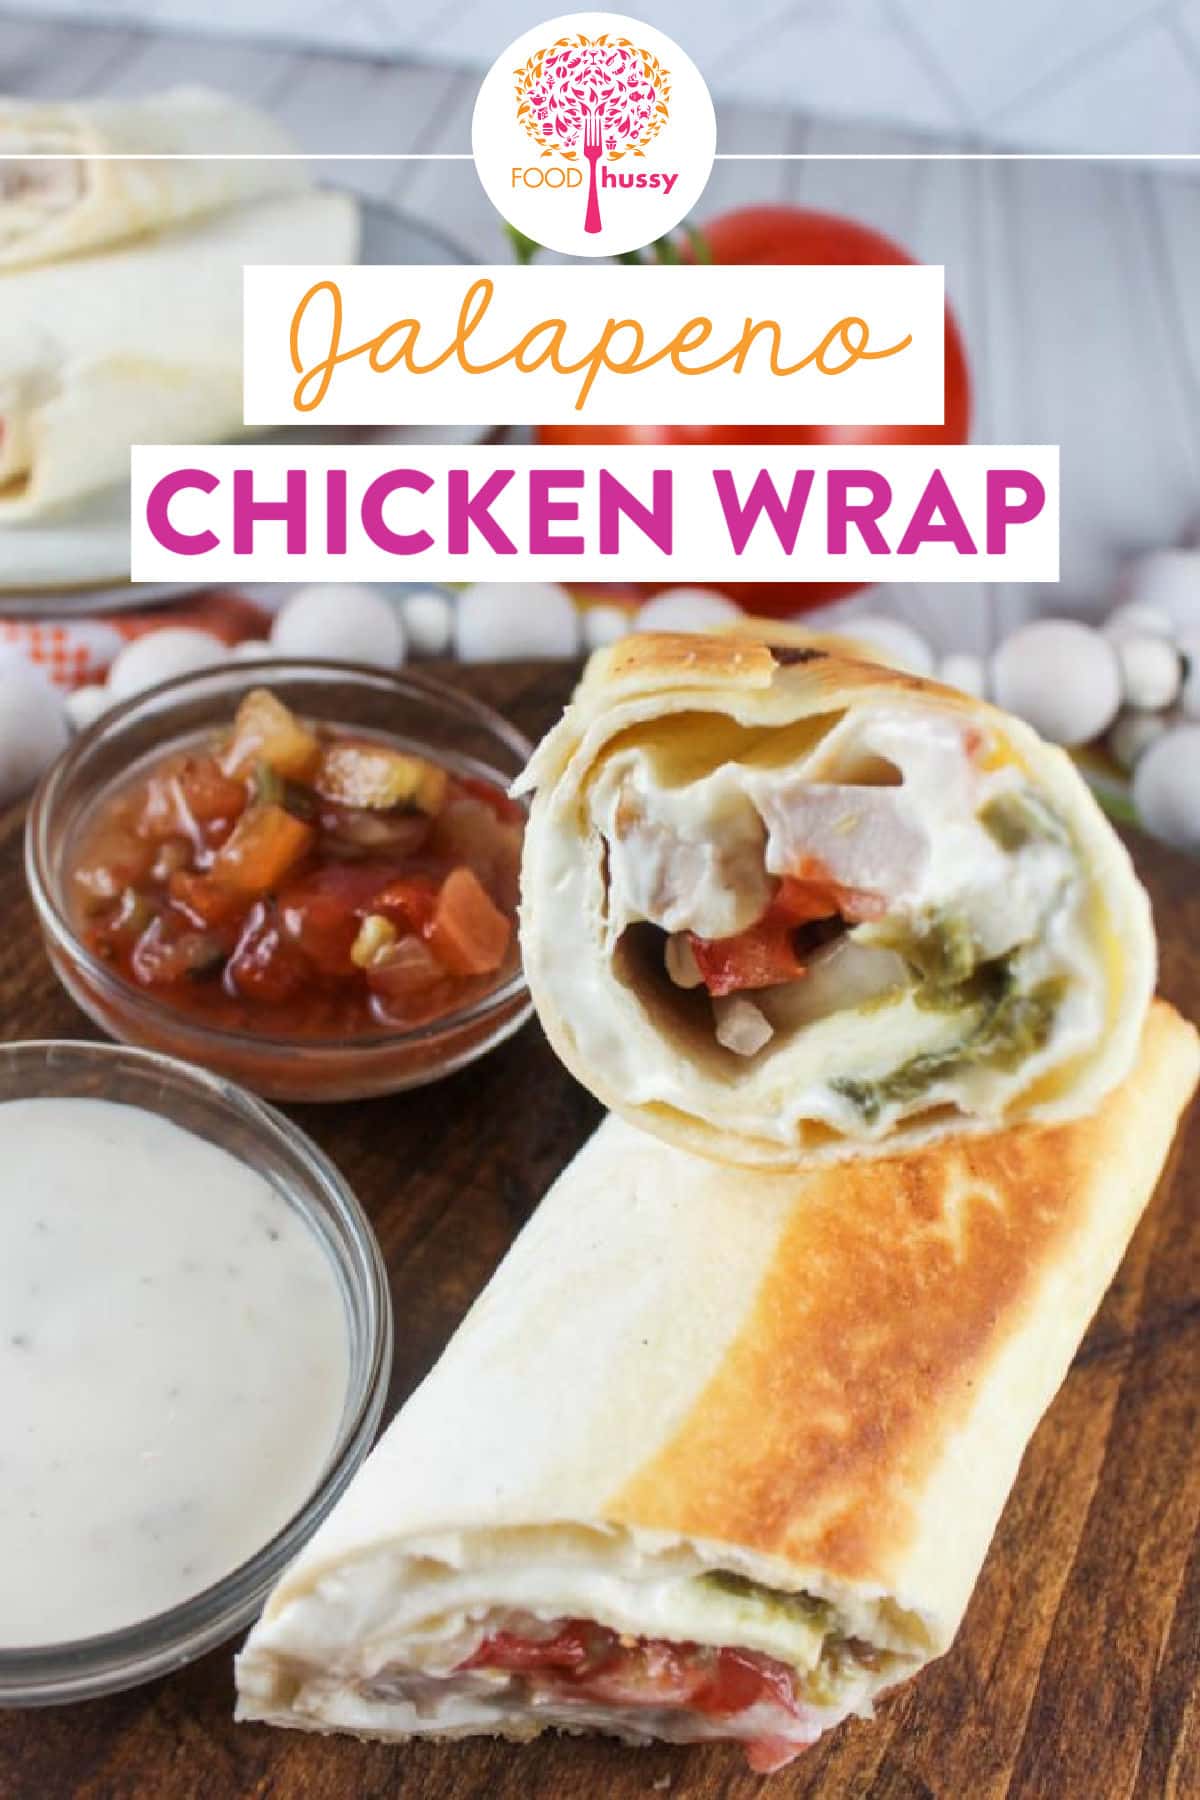 This Jalapeno Chicken Wrap is a copycat of my favorite lunchtime treat! This copycat of the Roly Poly Chicken Popper Wrap is filled with chicken, cream cheese, jalapenos and fresh vegetables! It's an easy dinner recipe and you're saving calories too!  via @foodhussy